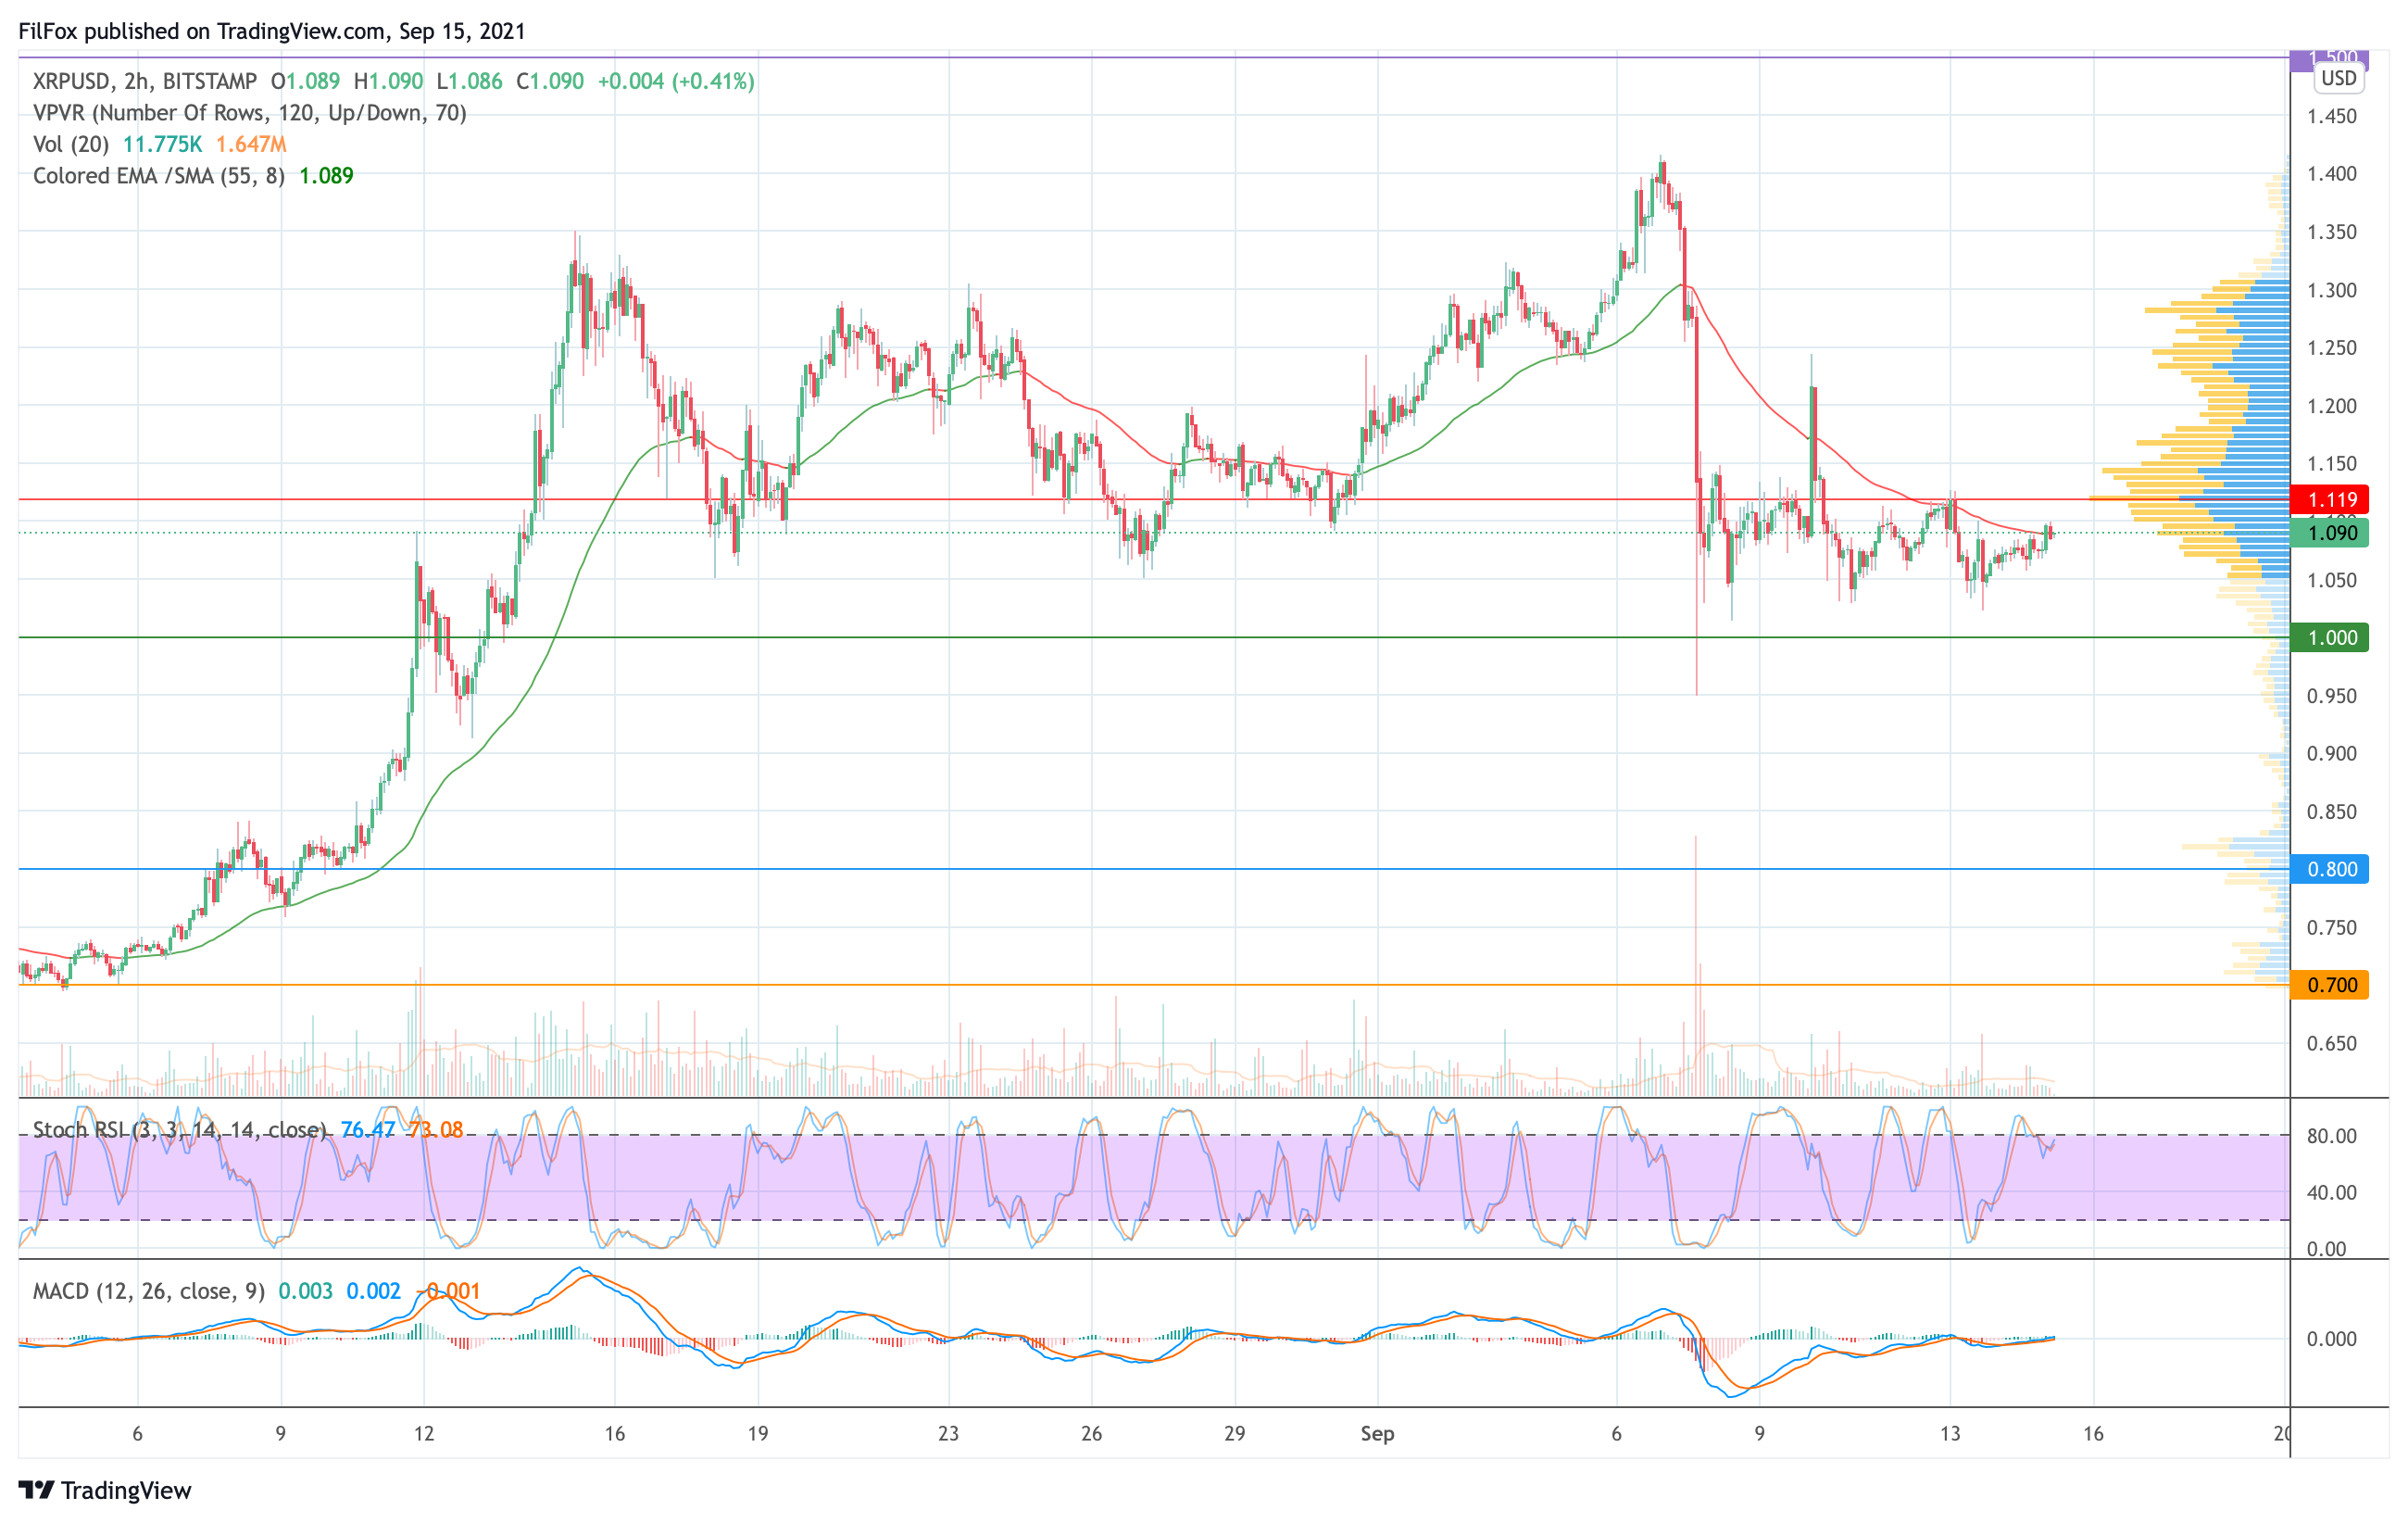 Analysis of the prices of Bitcoin, Ethereum, XRP for 09/15/2021